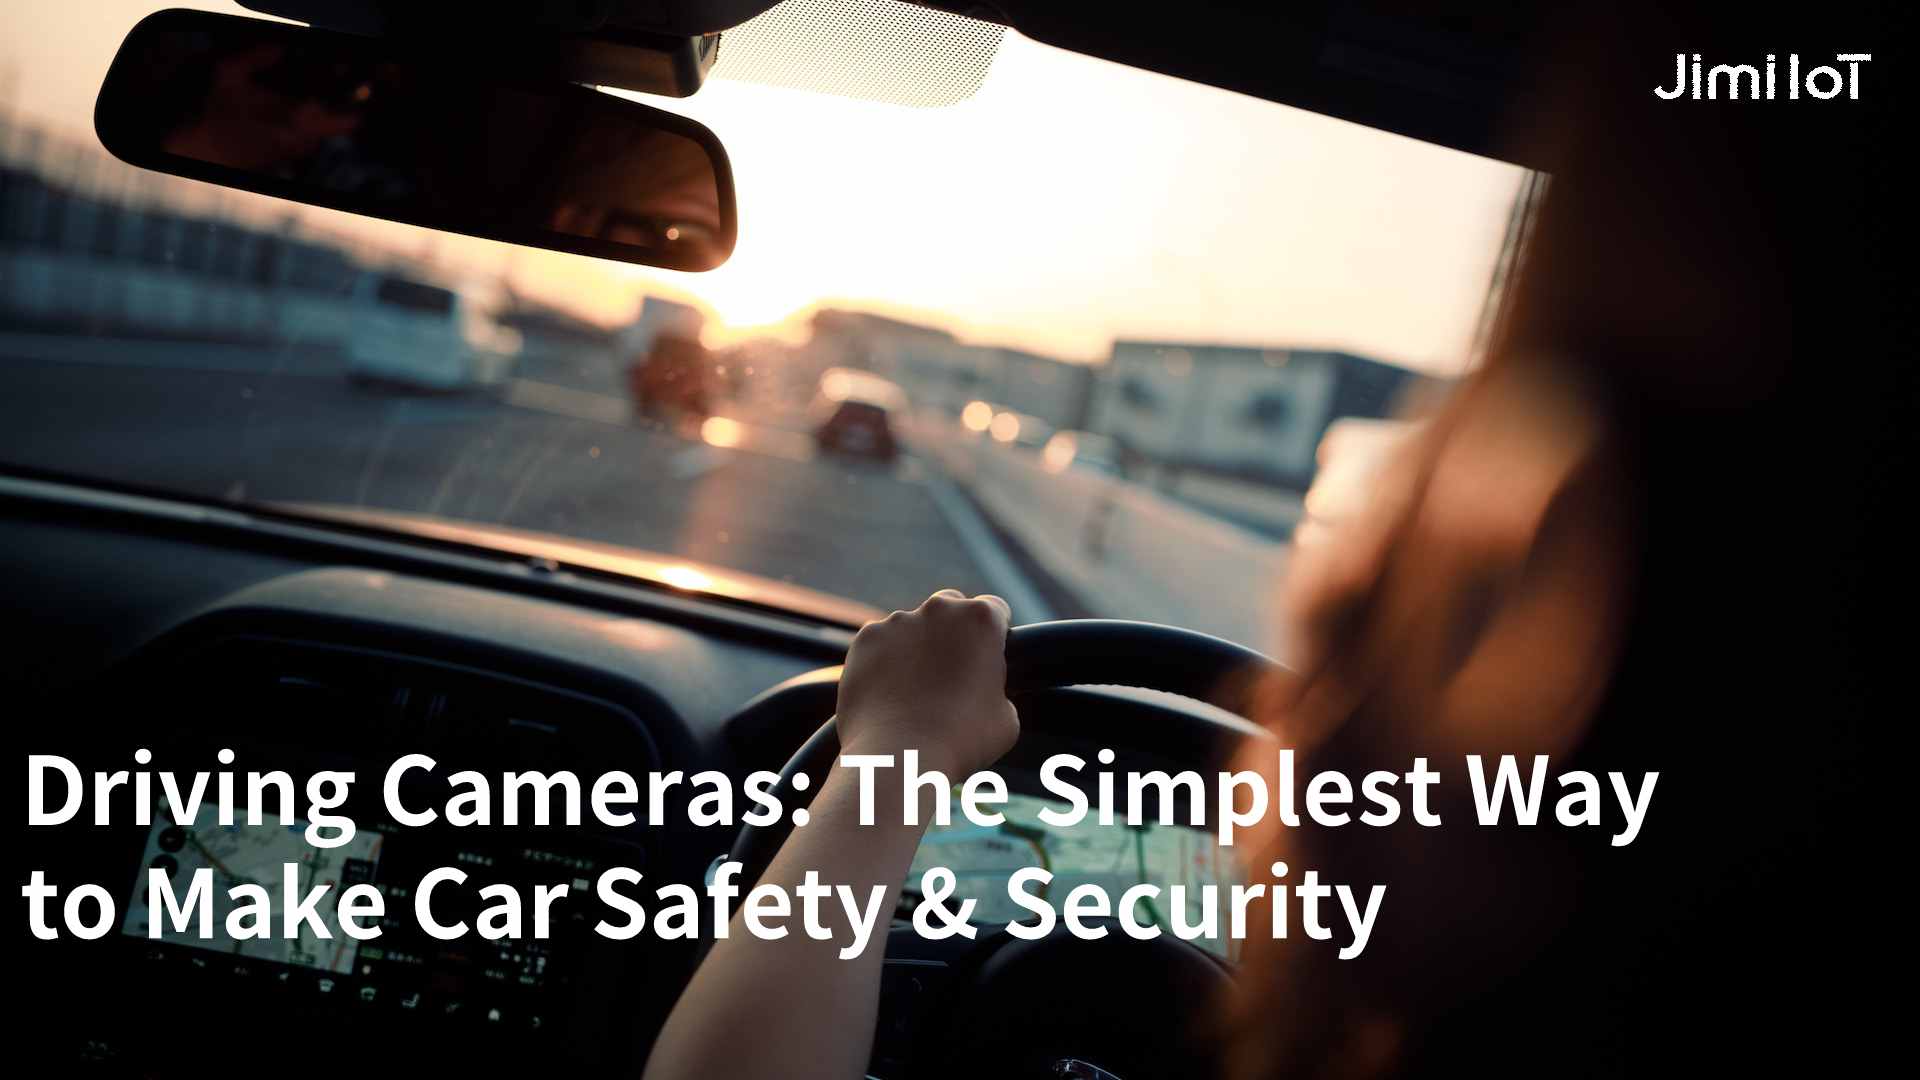 Driving Cameras The Simplest Way to Make Car Safety & Security